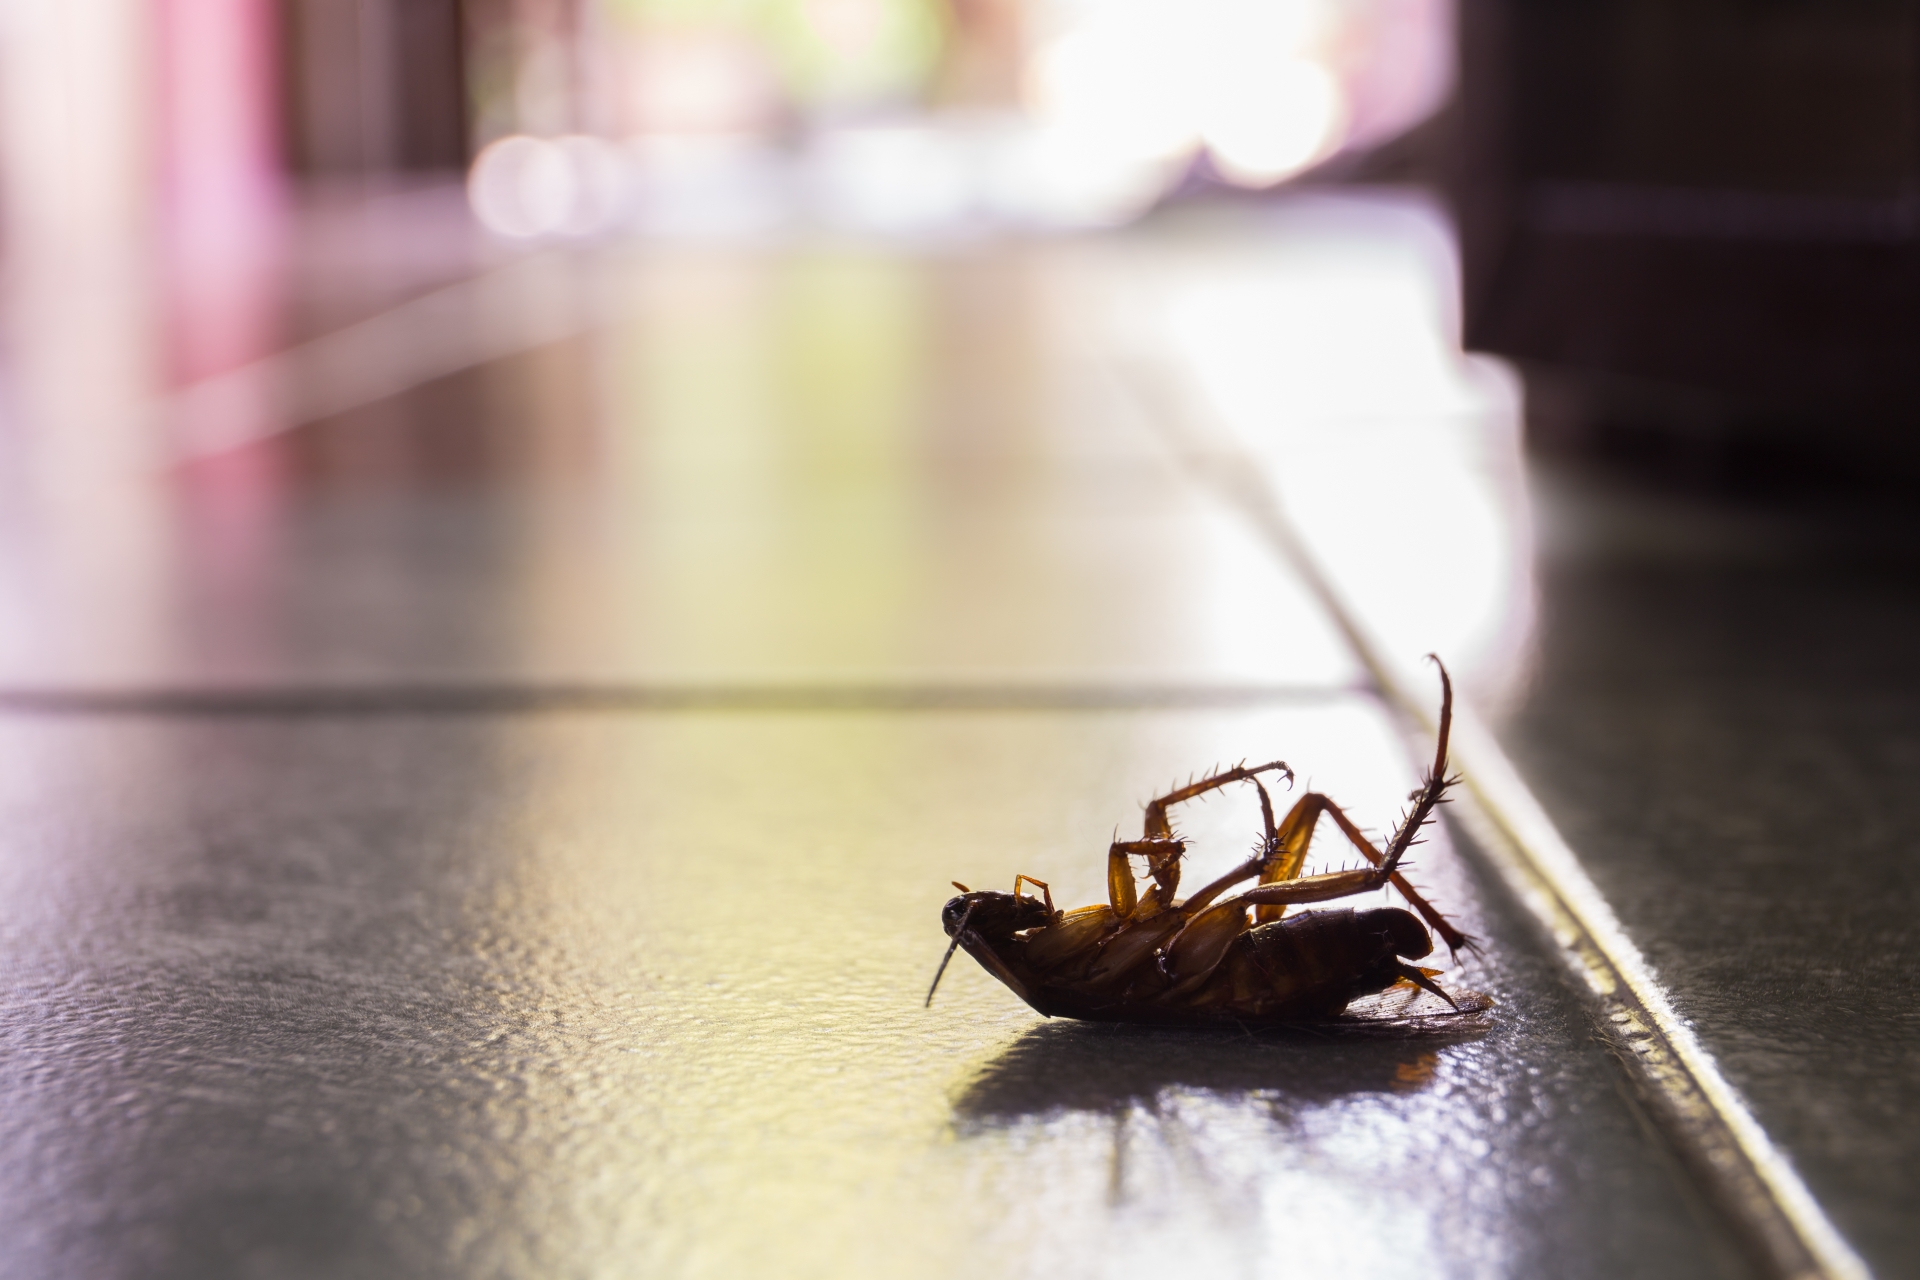 Cockroach Control, Pest Control in Putney, SW15. Call Now 020 8166 9746